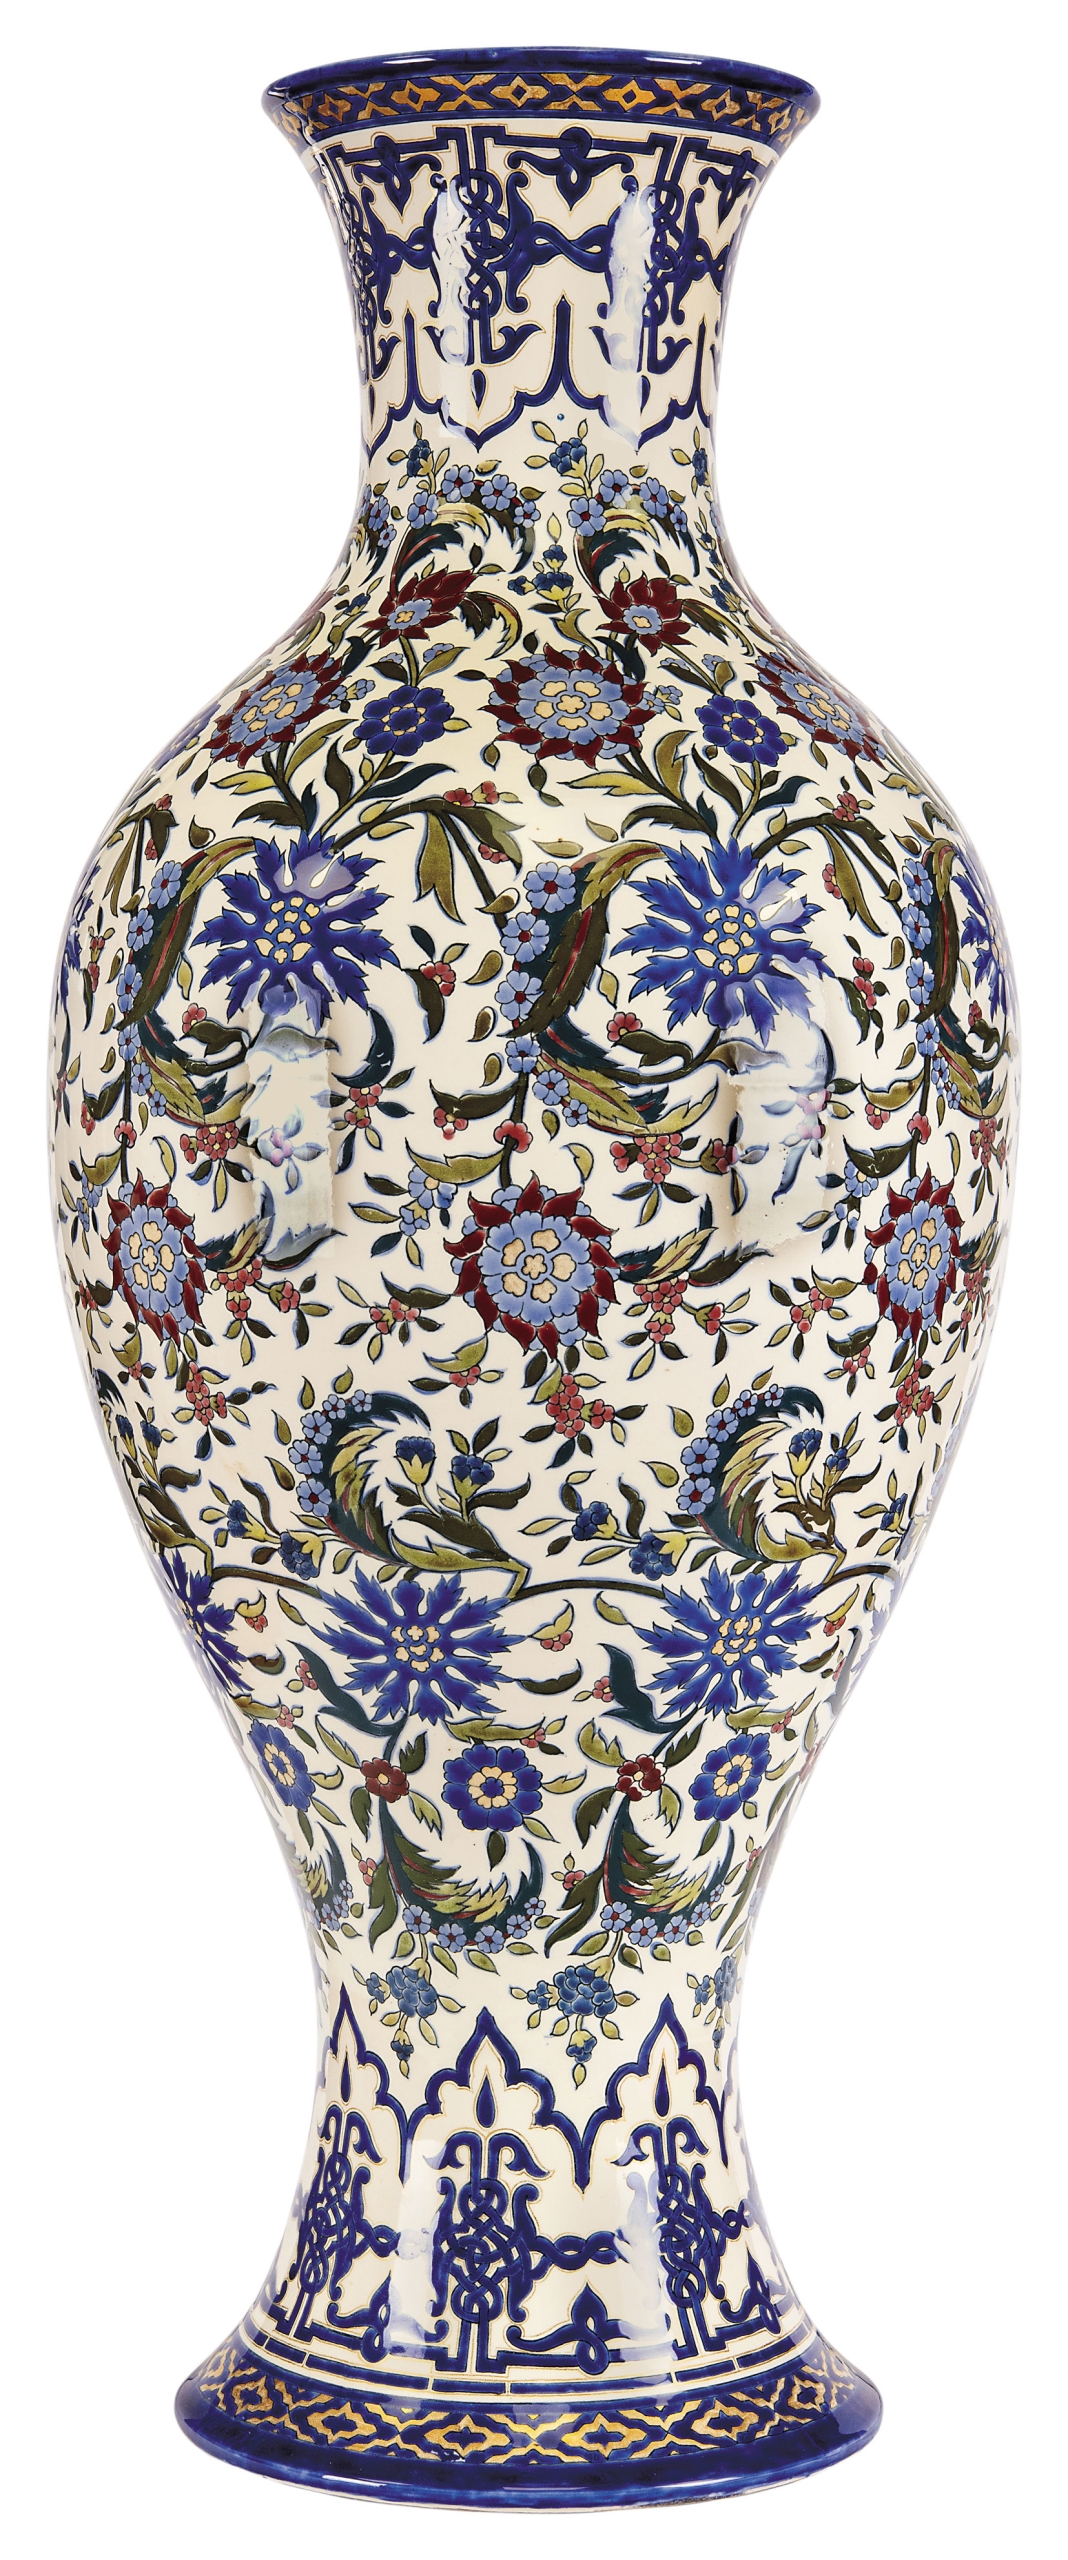 Zsolnay Giant Vase decorated with Persian Pattern, 1880-1881, decor plan by: ZSOLNAY JÚLIA